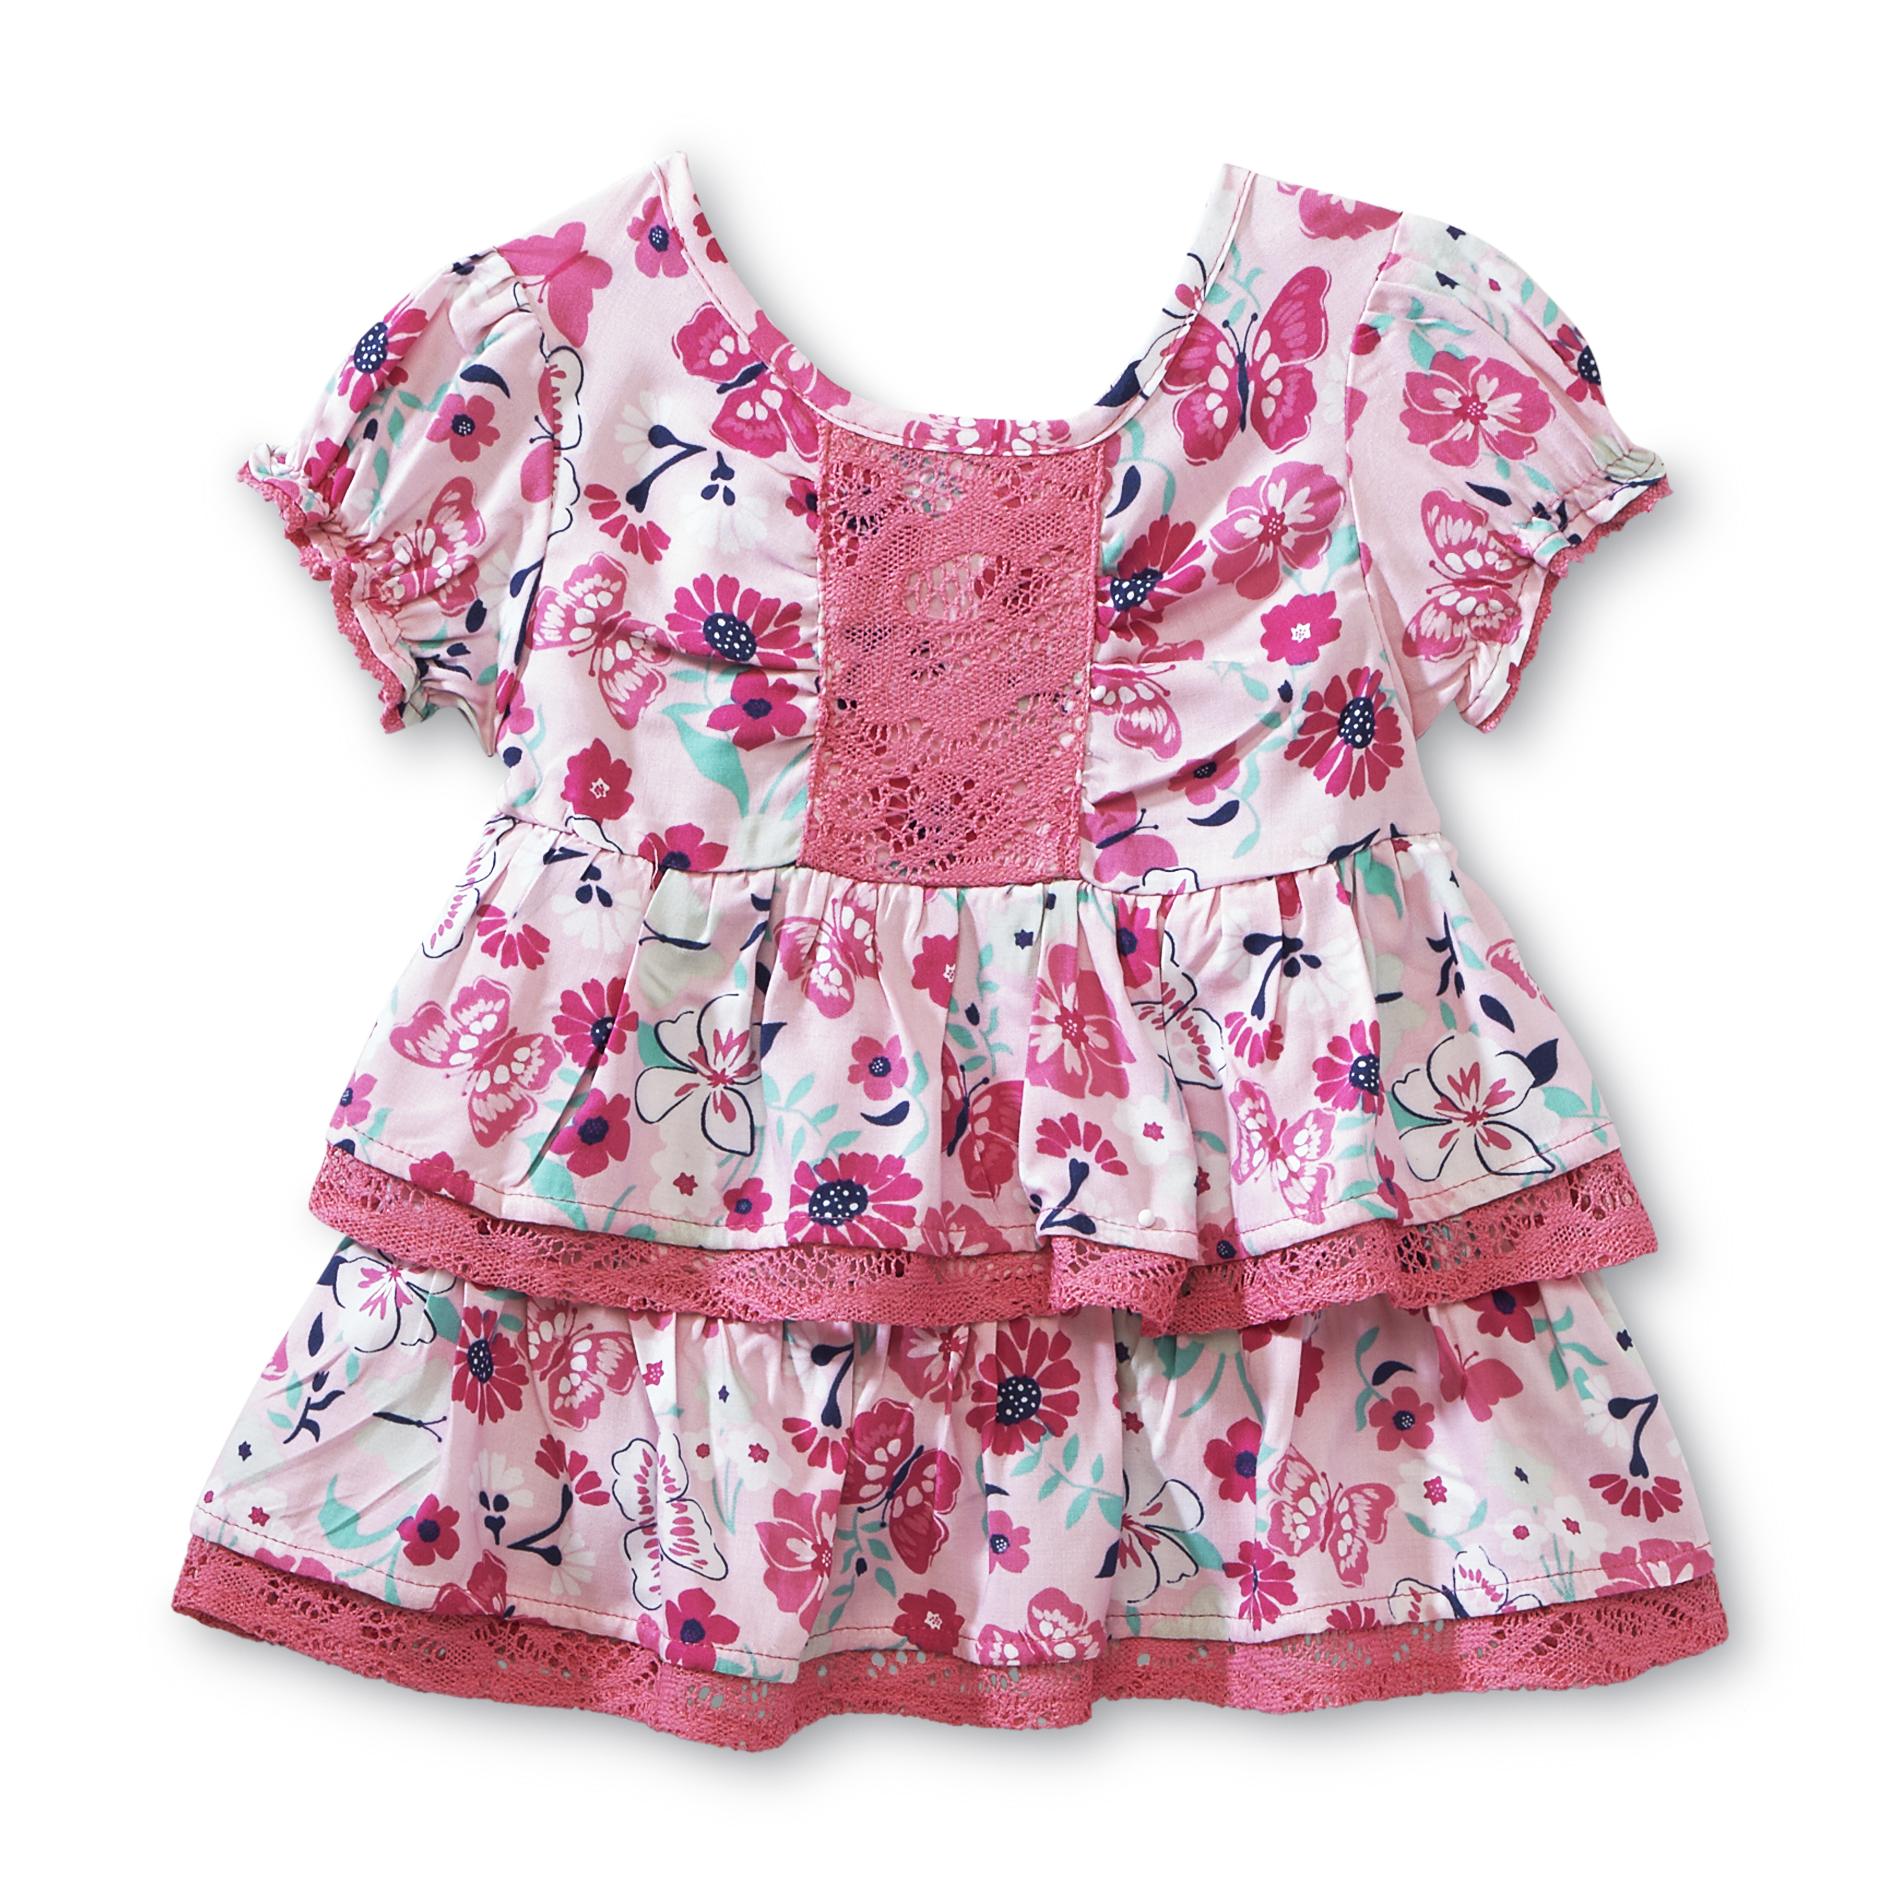 Route 66 Infant & Toddler Girl's Babydoll Tunic - Floral & Butterfly